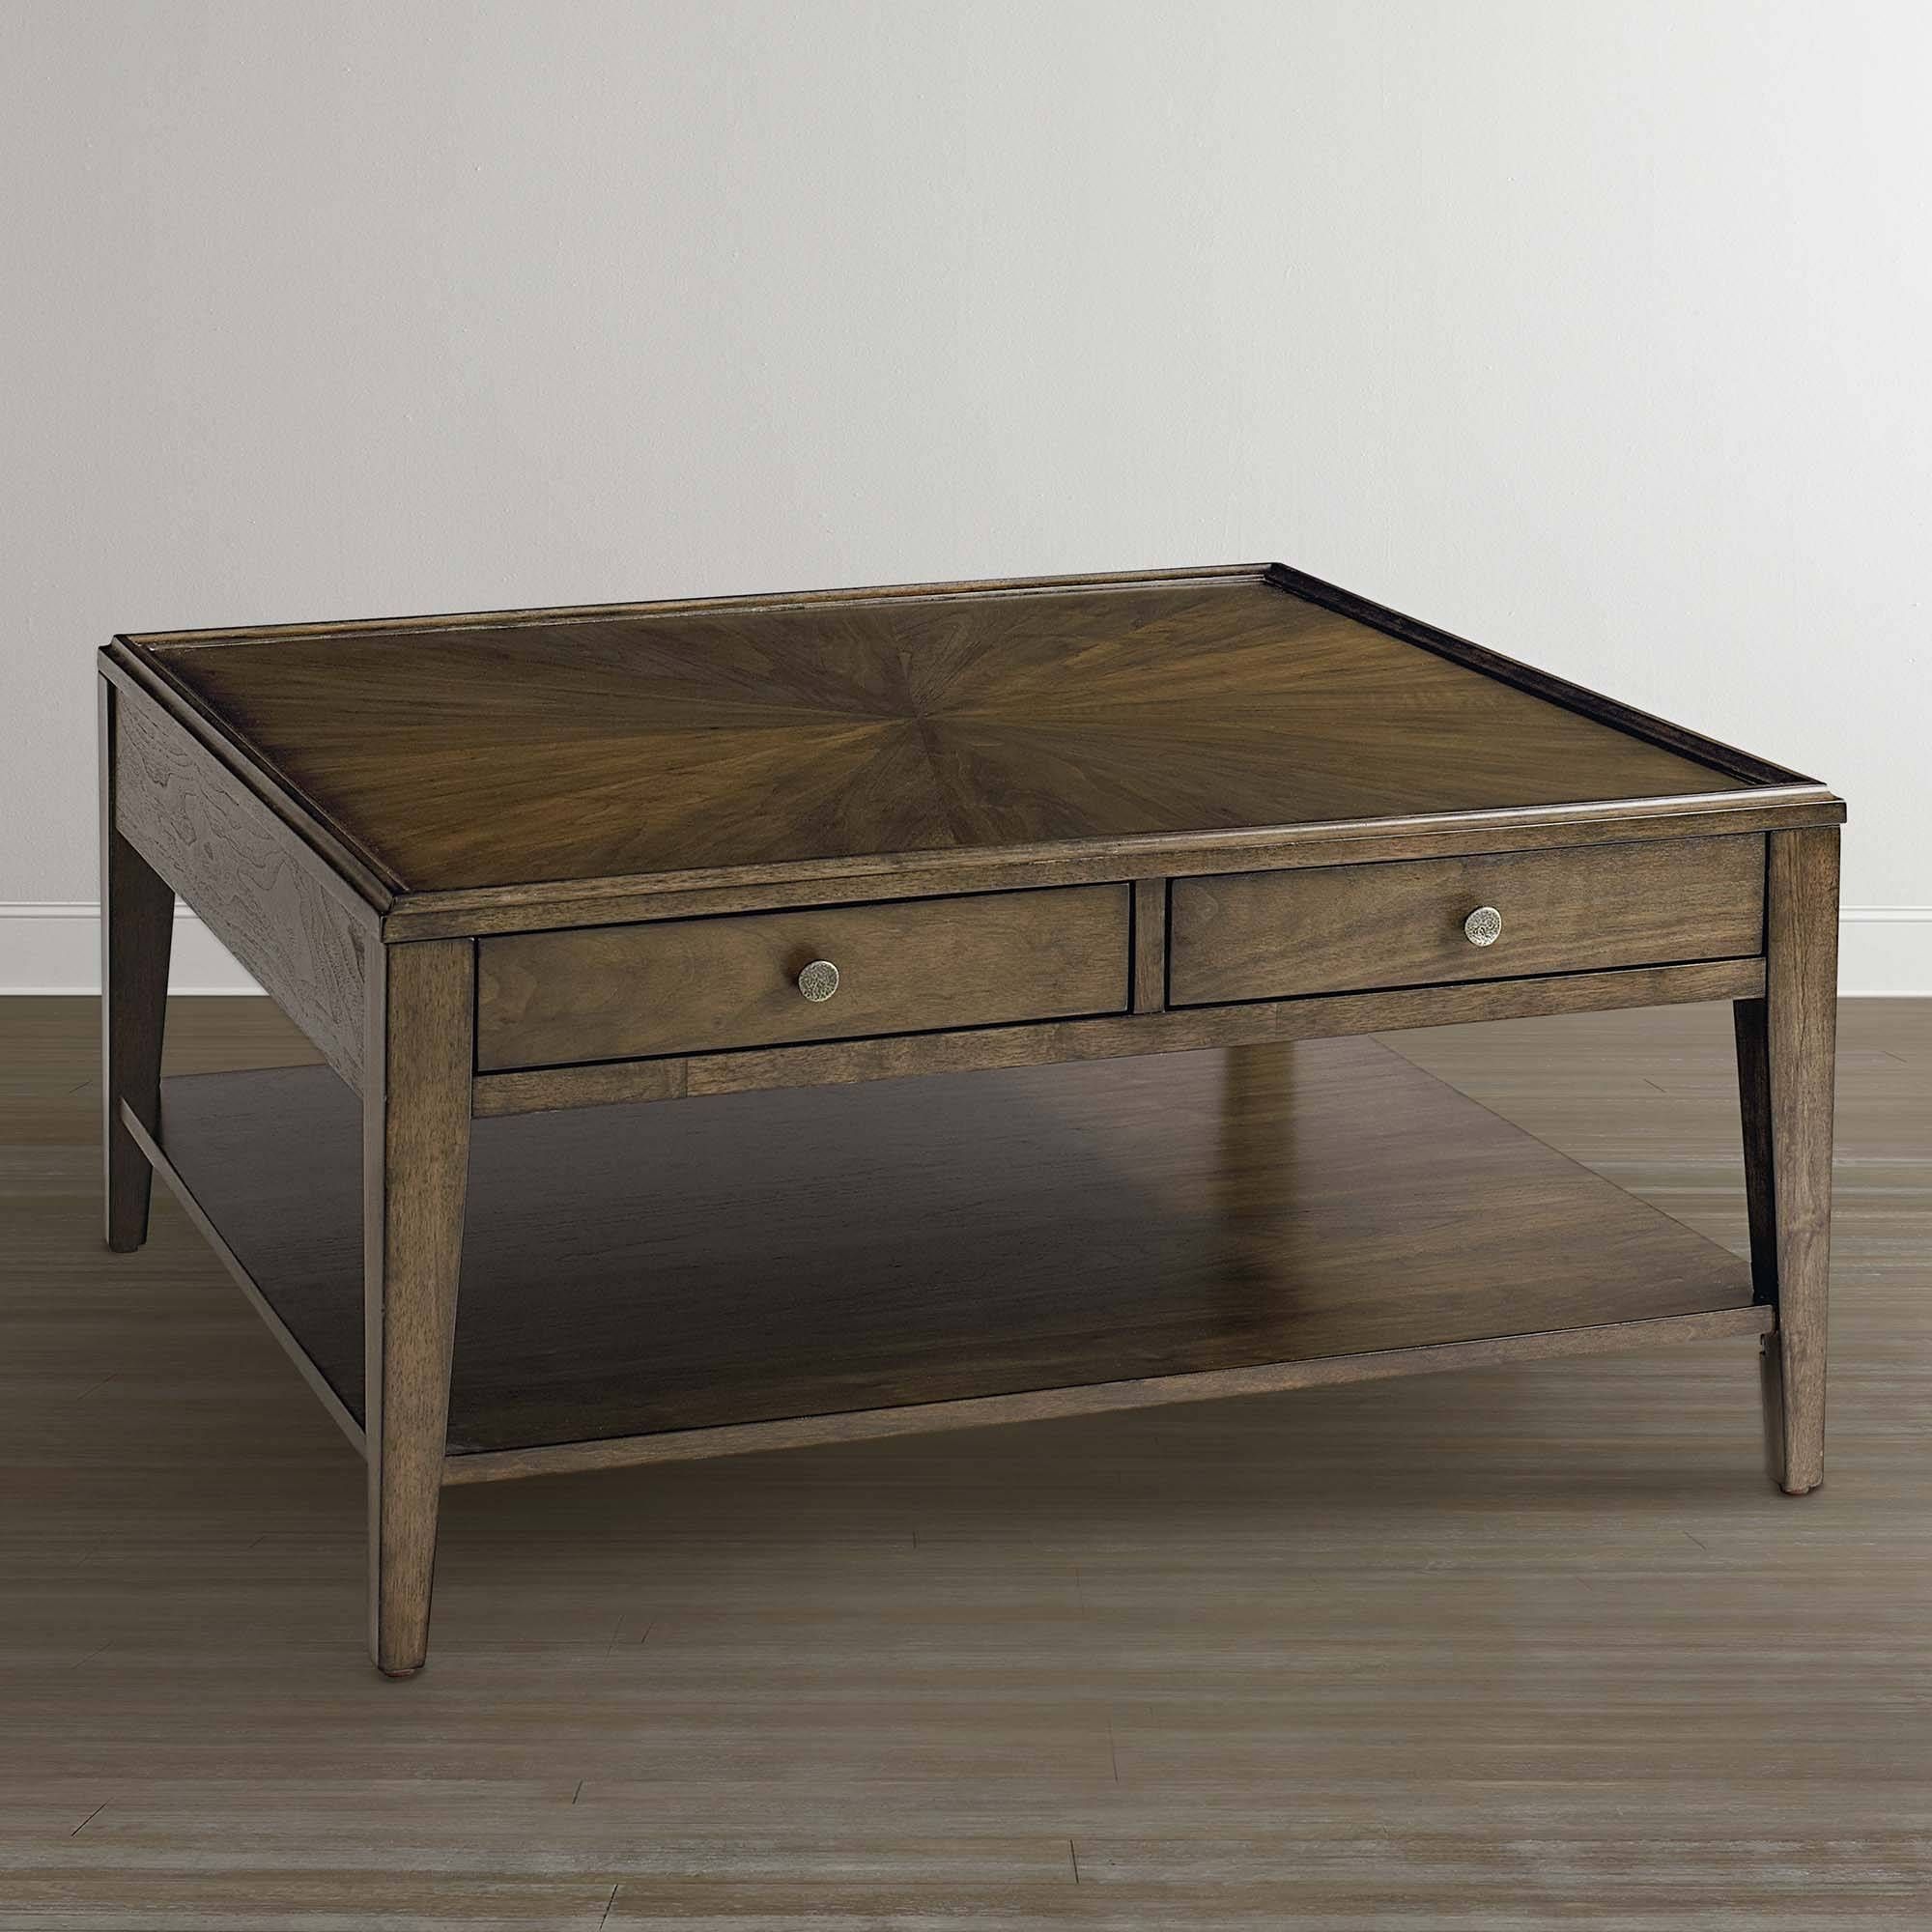 Coffee Table Square Coffee Table With Storage Drawers Drawer And Intended For Square Coffee Table With Storage Drawers (View 11 of 15)